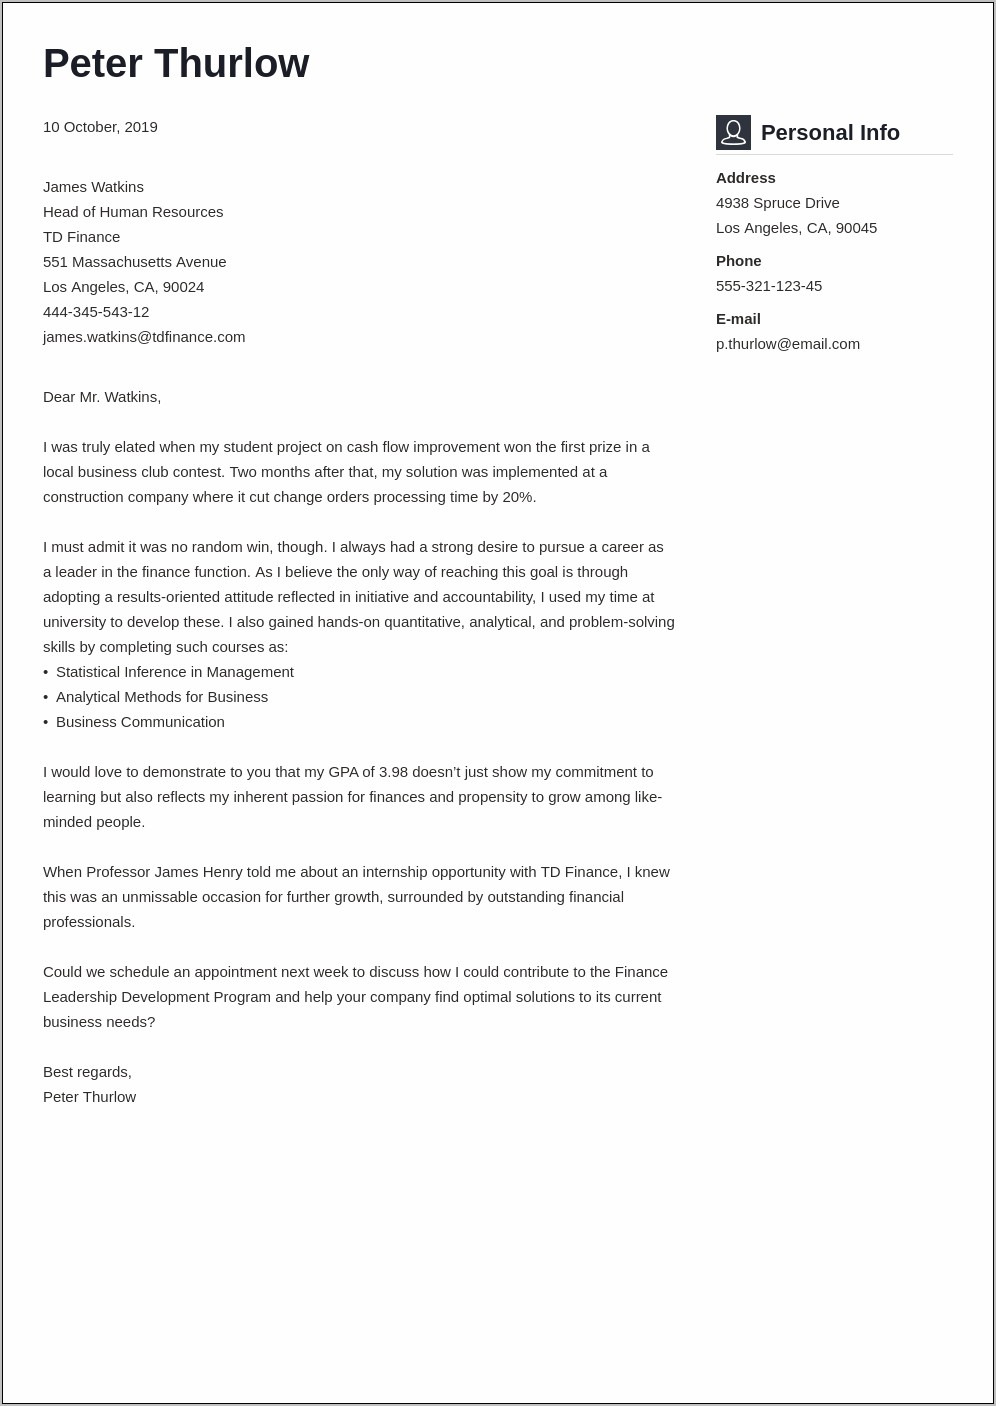 Resume And Cover Letter Creation Forums